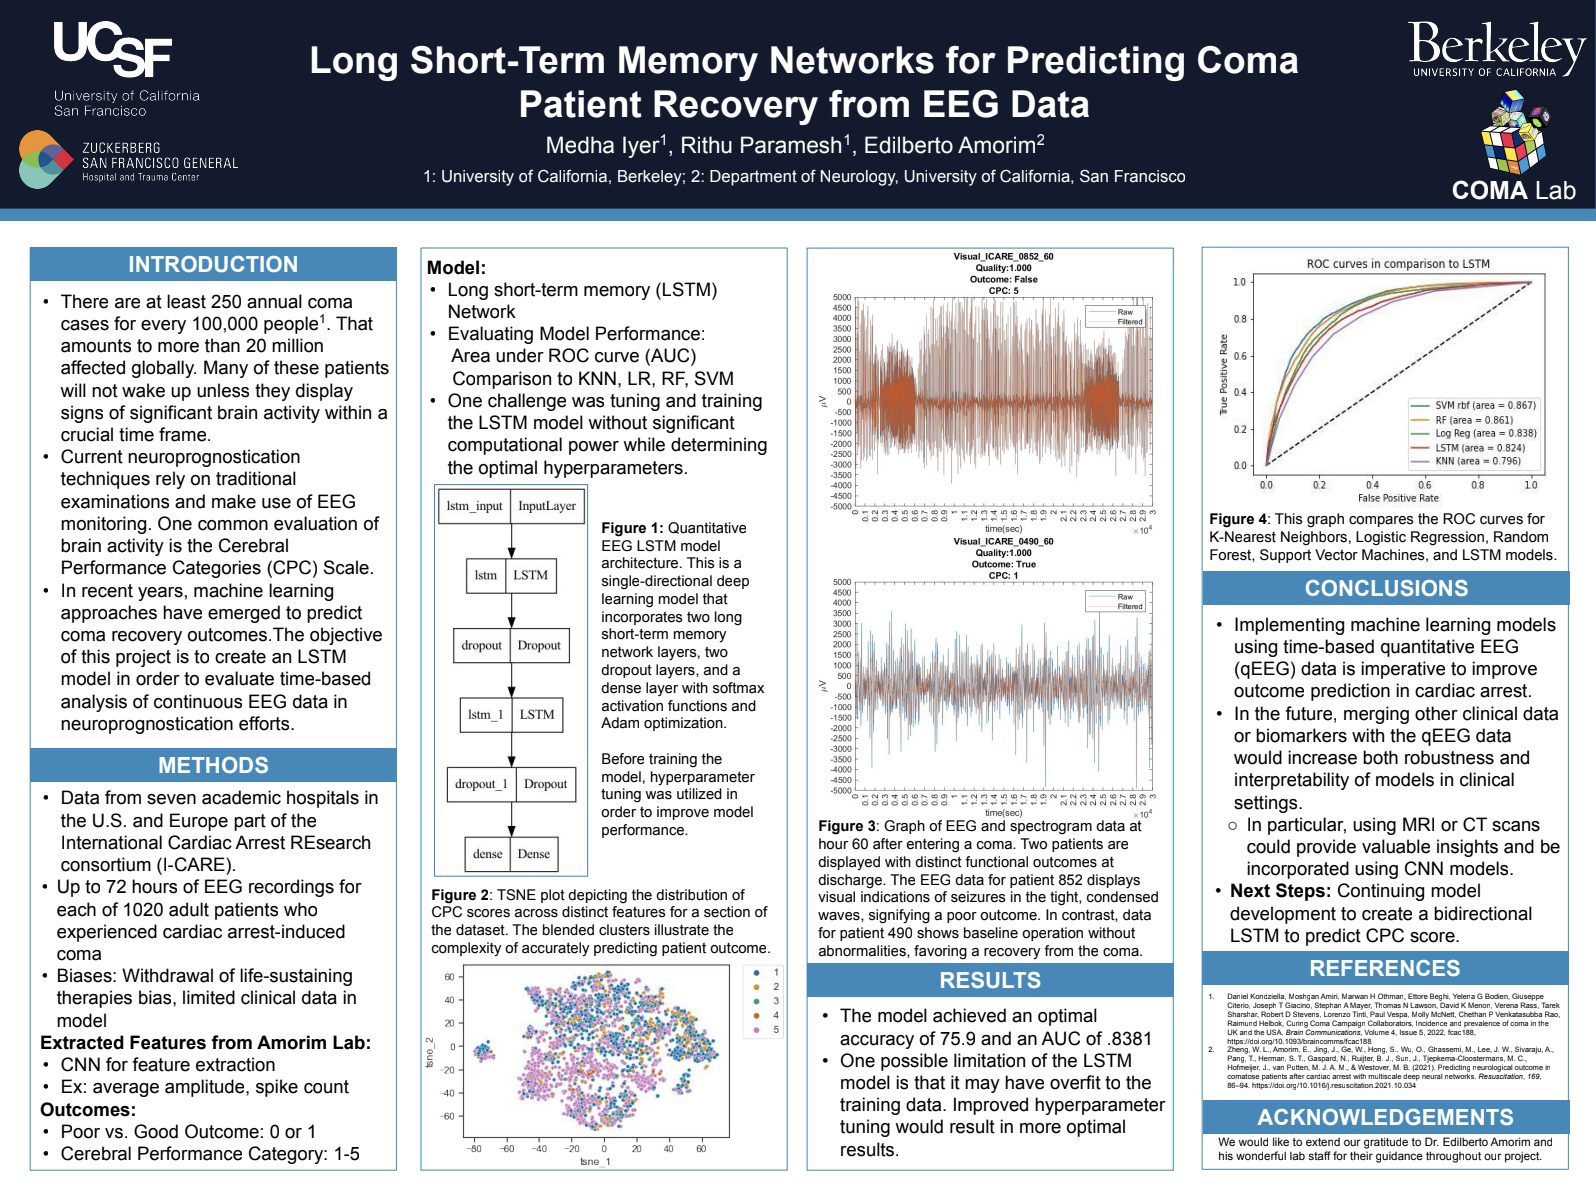 Long Short-Term Memory Networks for Predicting Coma Patient Recovery from EEG Data - Fall 2022 Discovery Project